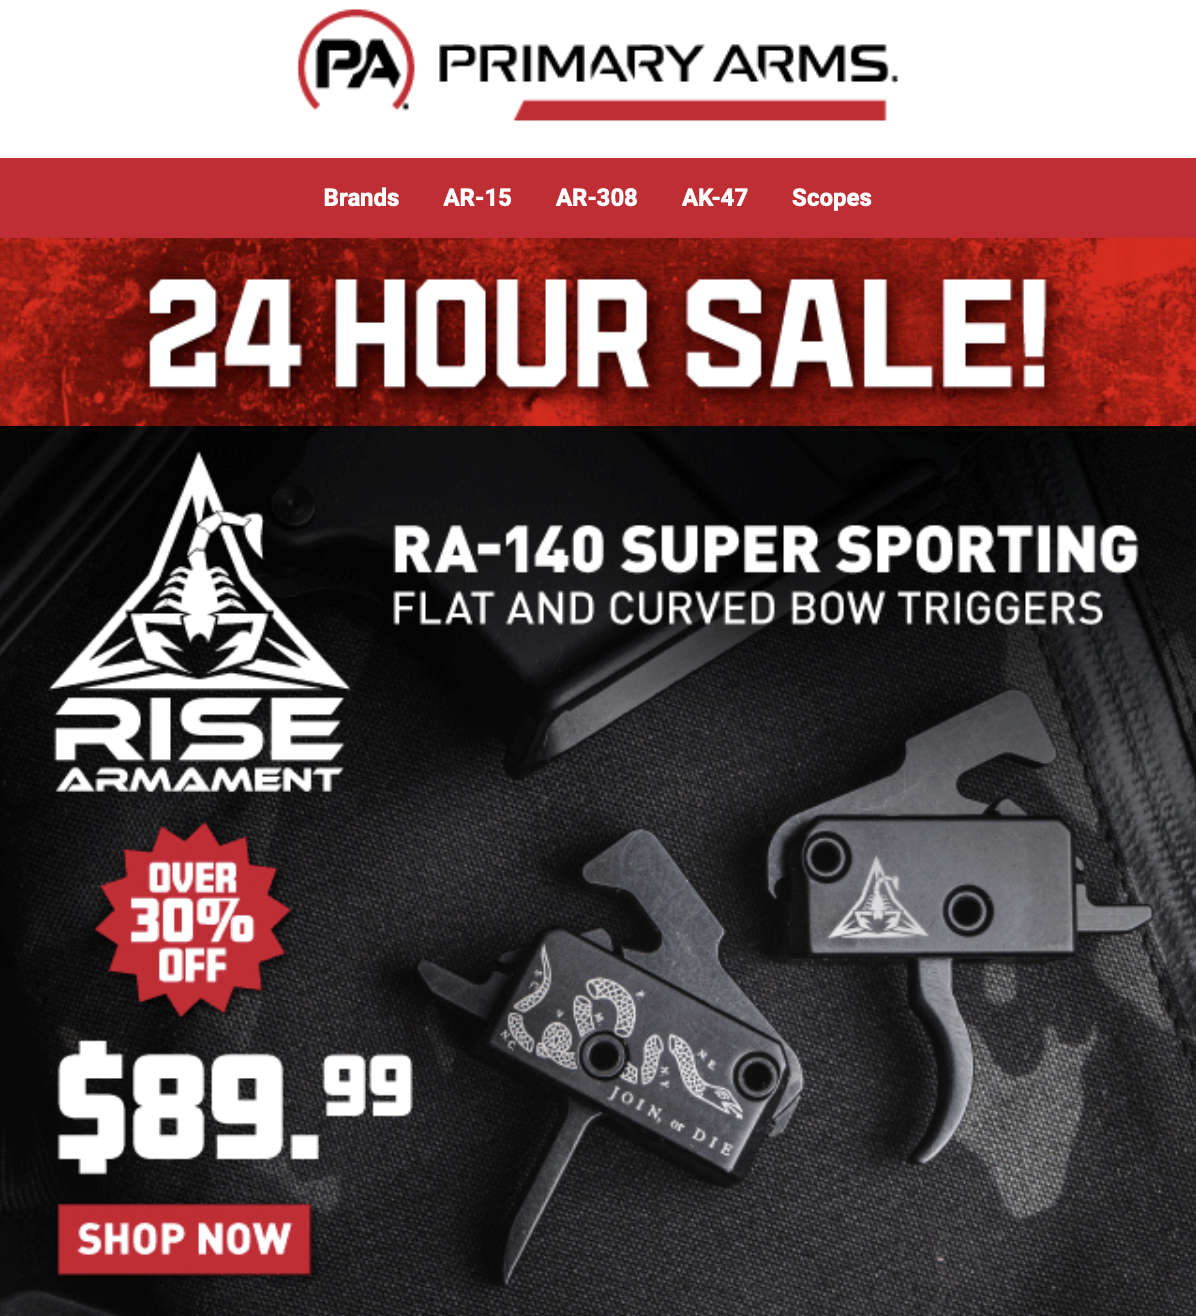 Primary Arms 24 Hour Sale